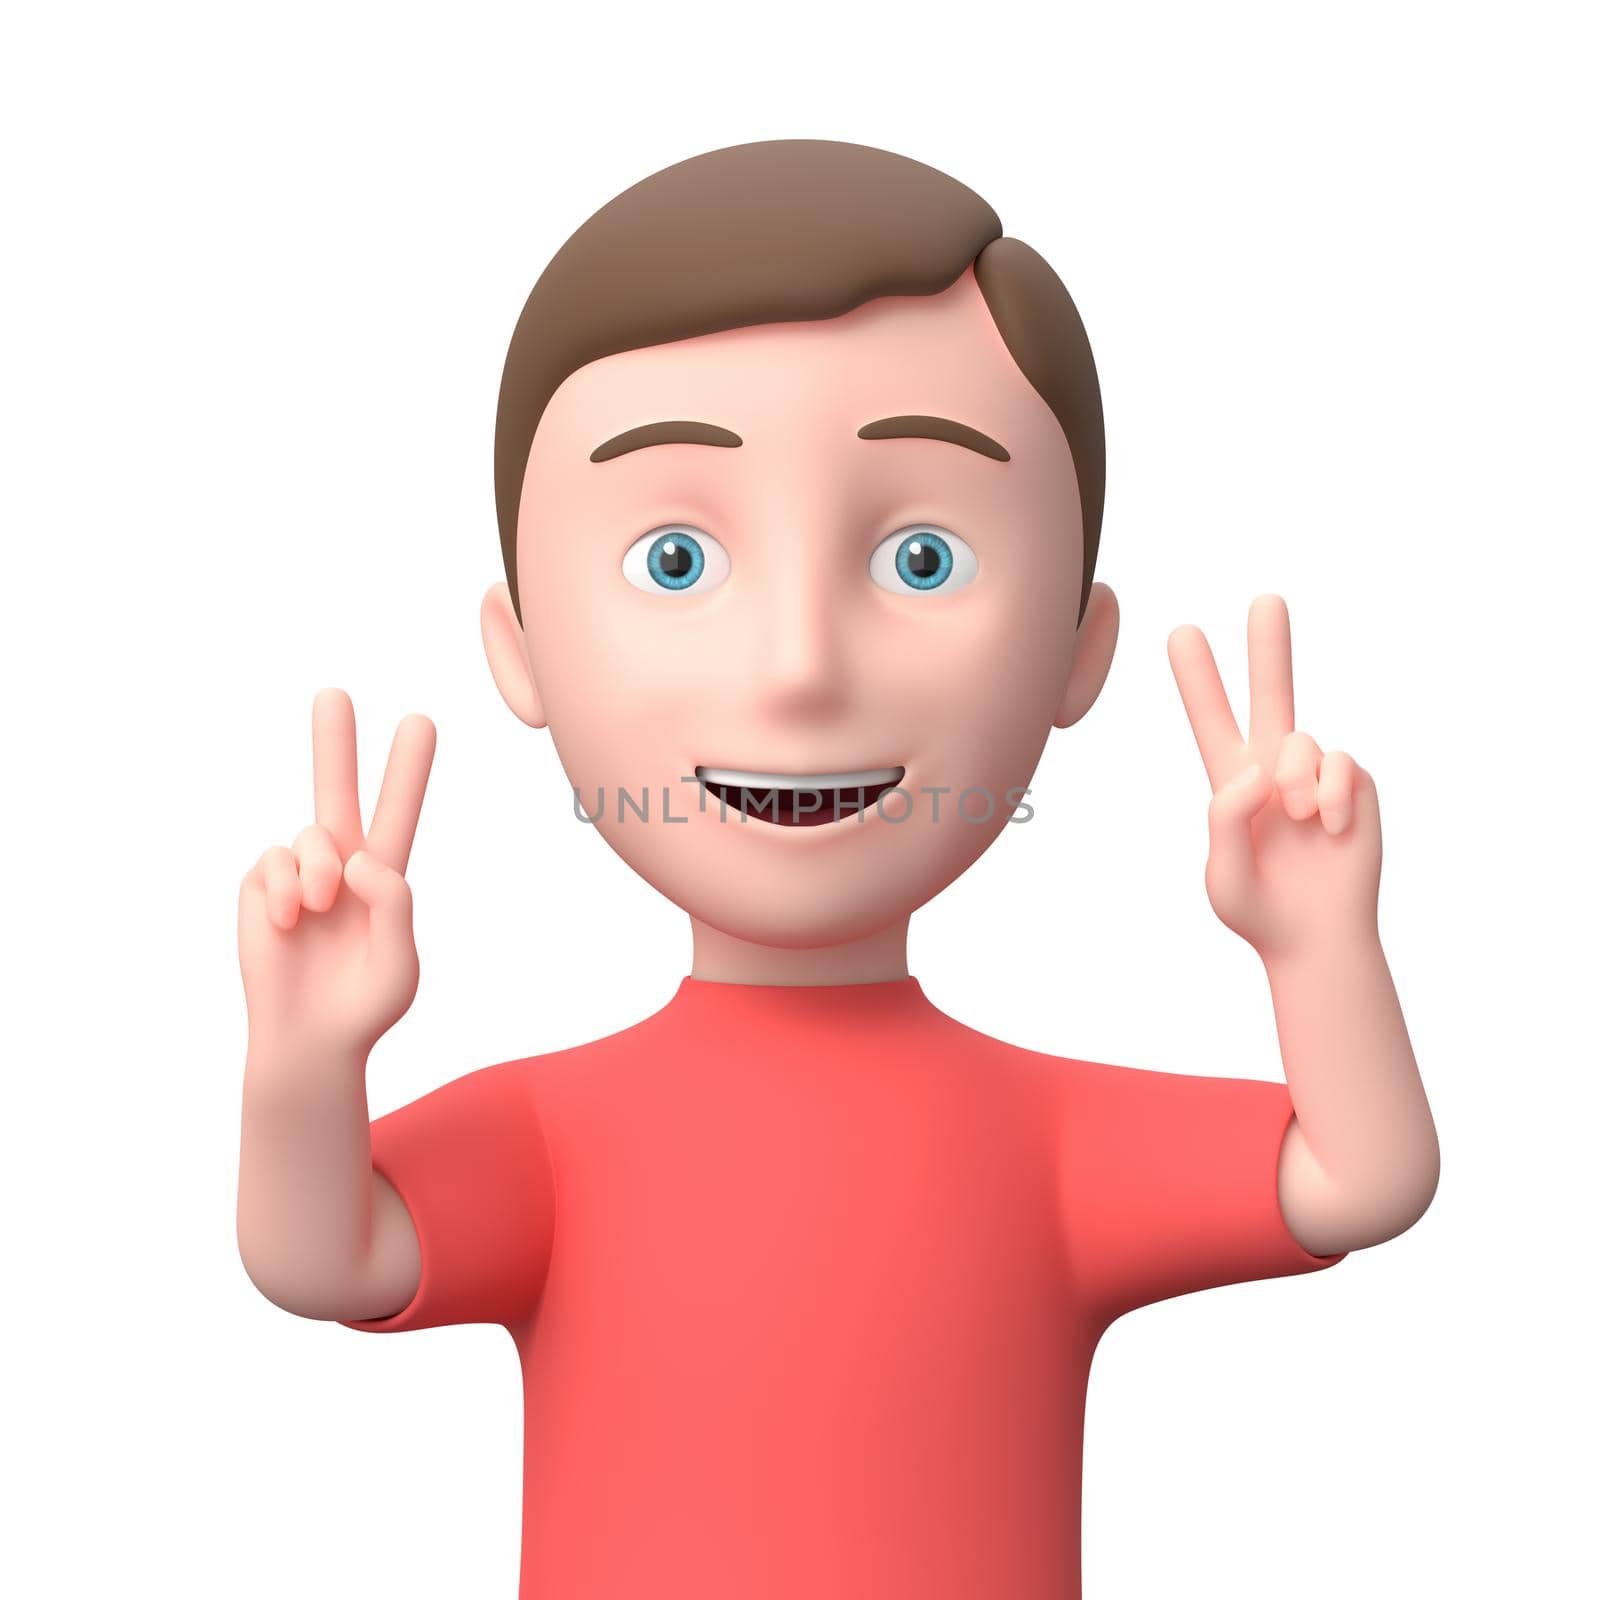 Young Boy Smiling and Showing V Sign. 3D Cartoon Character. Isolated on White Background 3D Illustration, Victory Concept